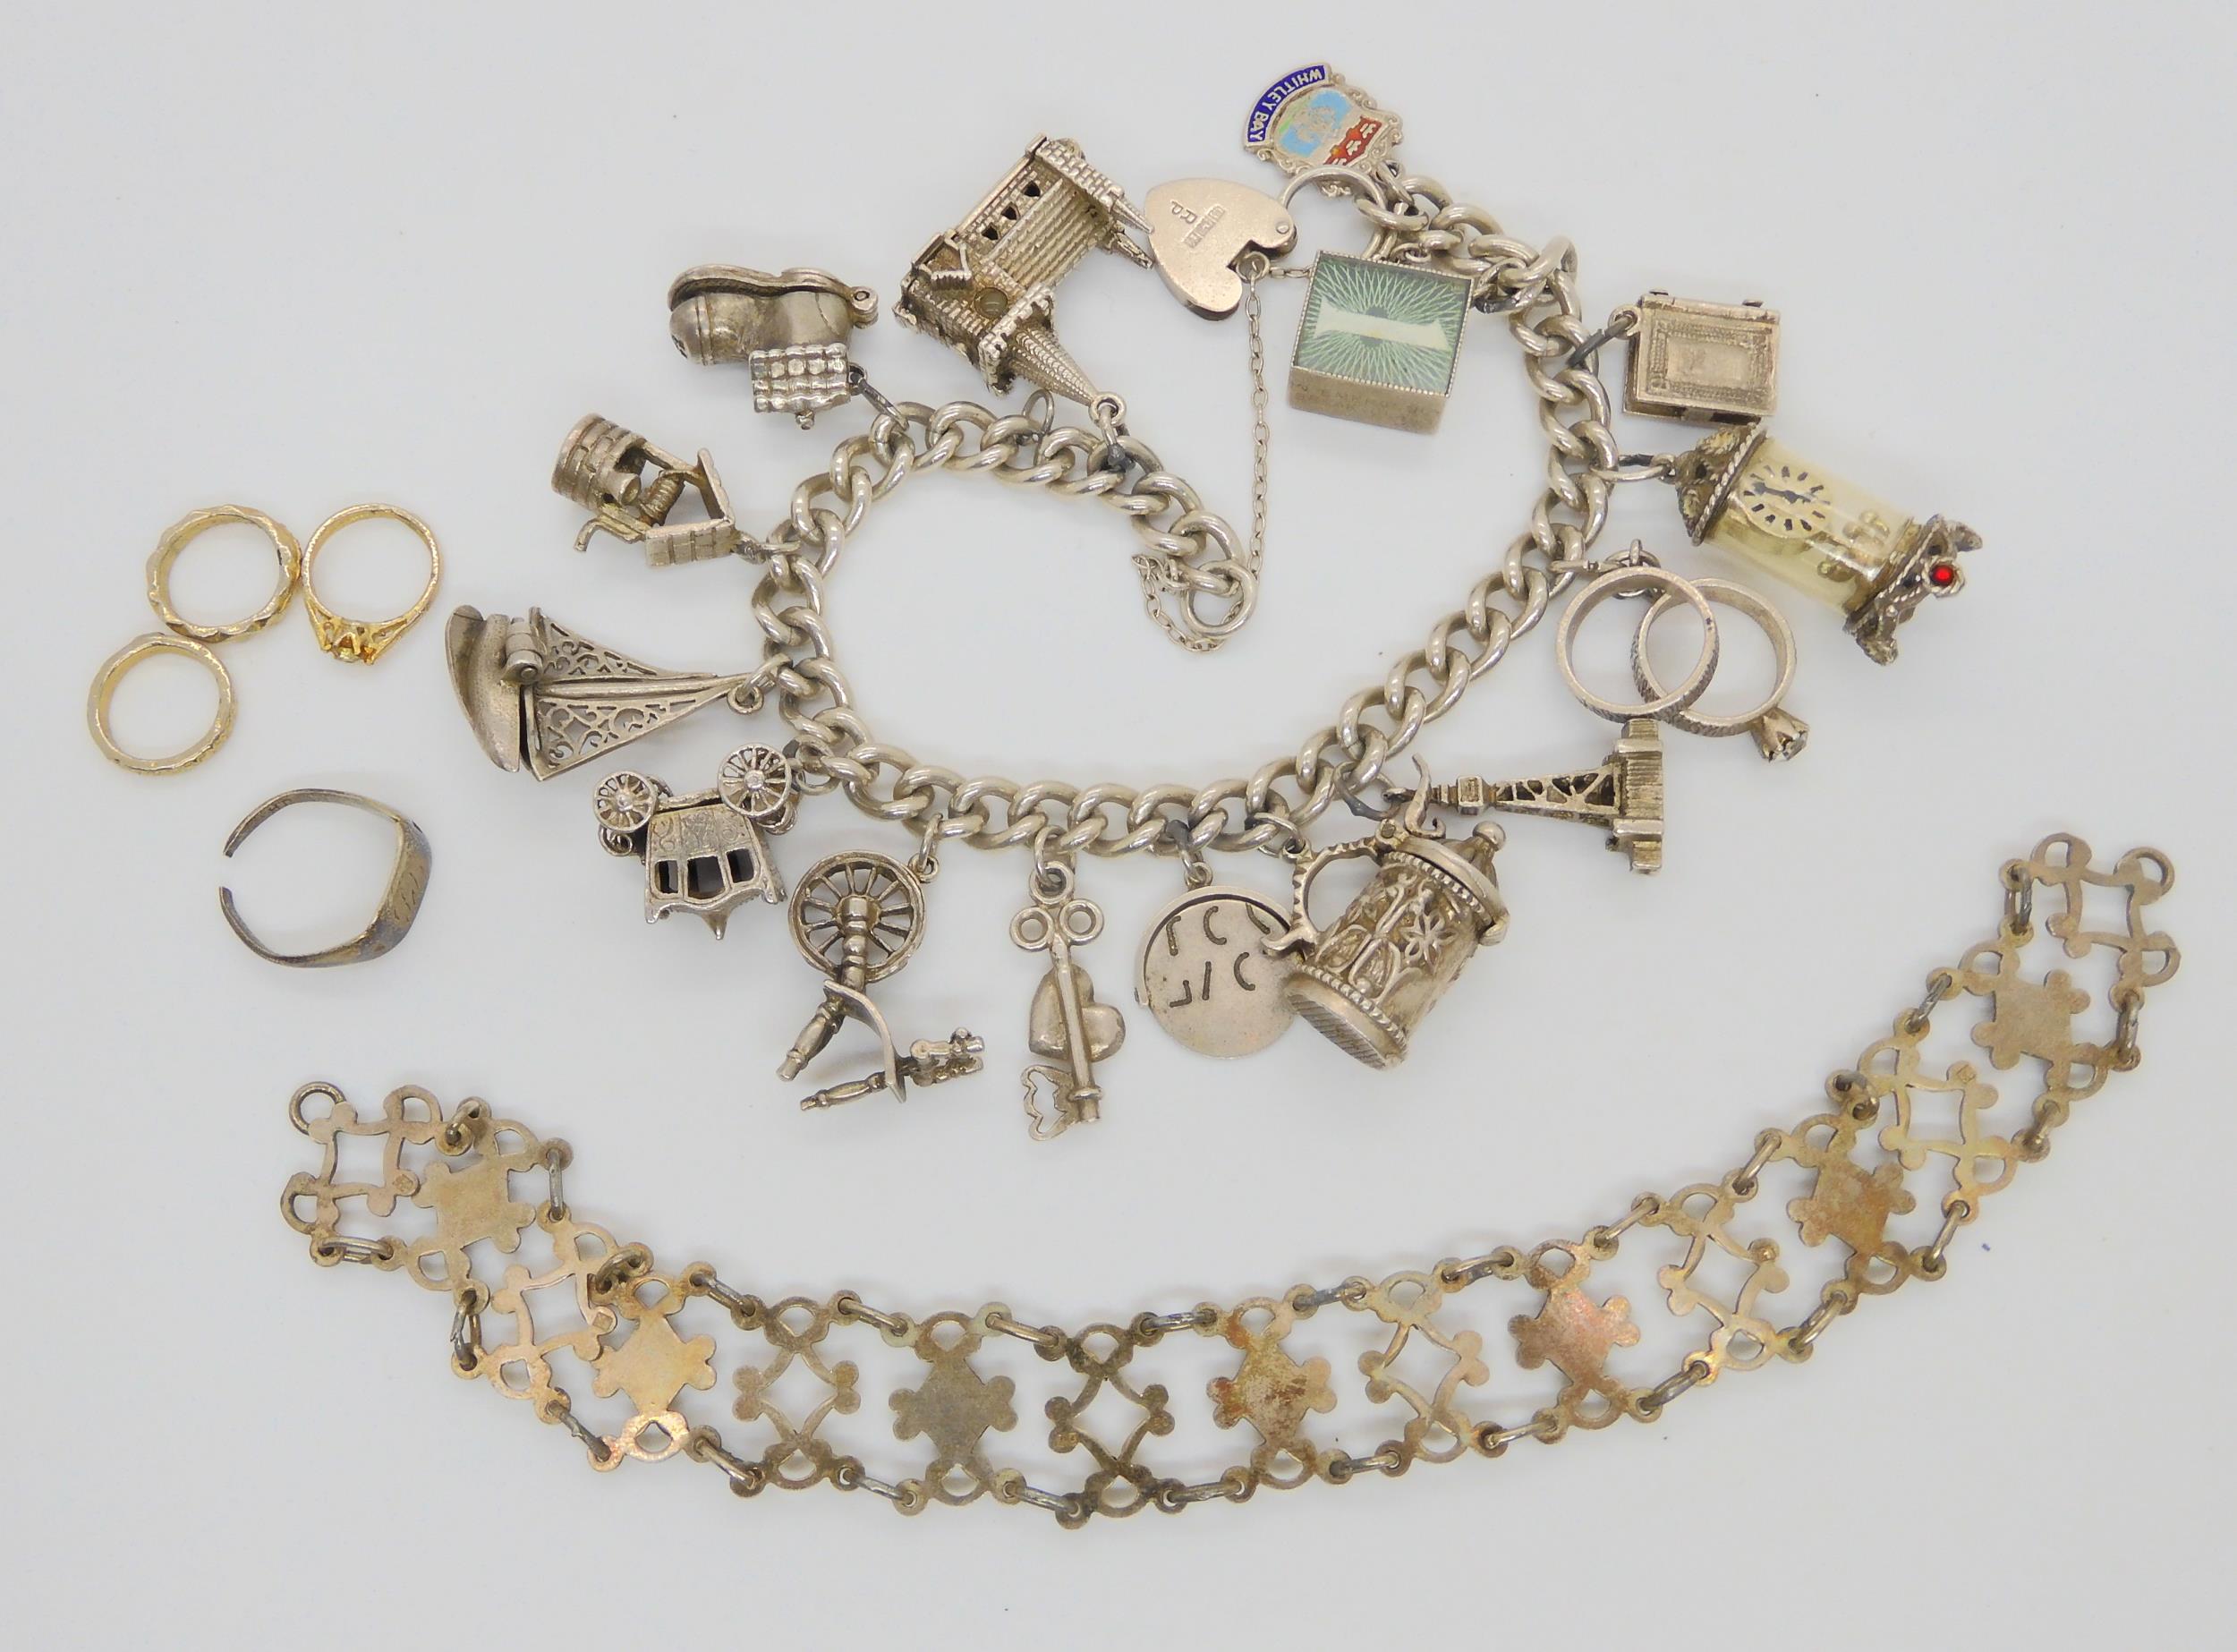 A silver charm bracelet with fifteen attached silver and white metal charms, and a silver bracelet